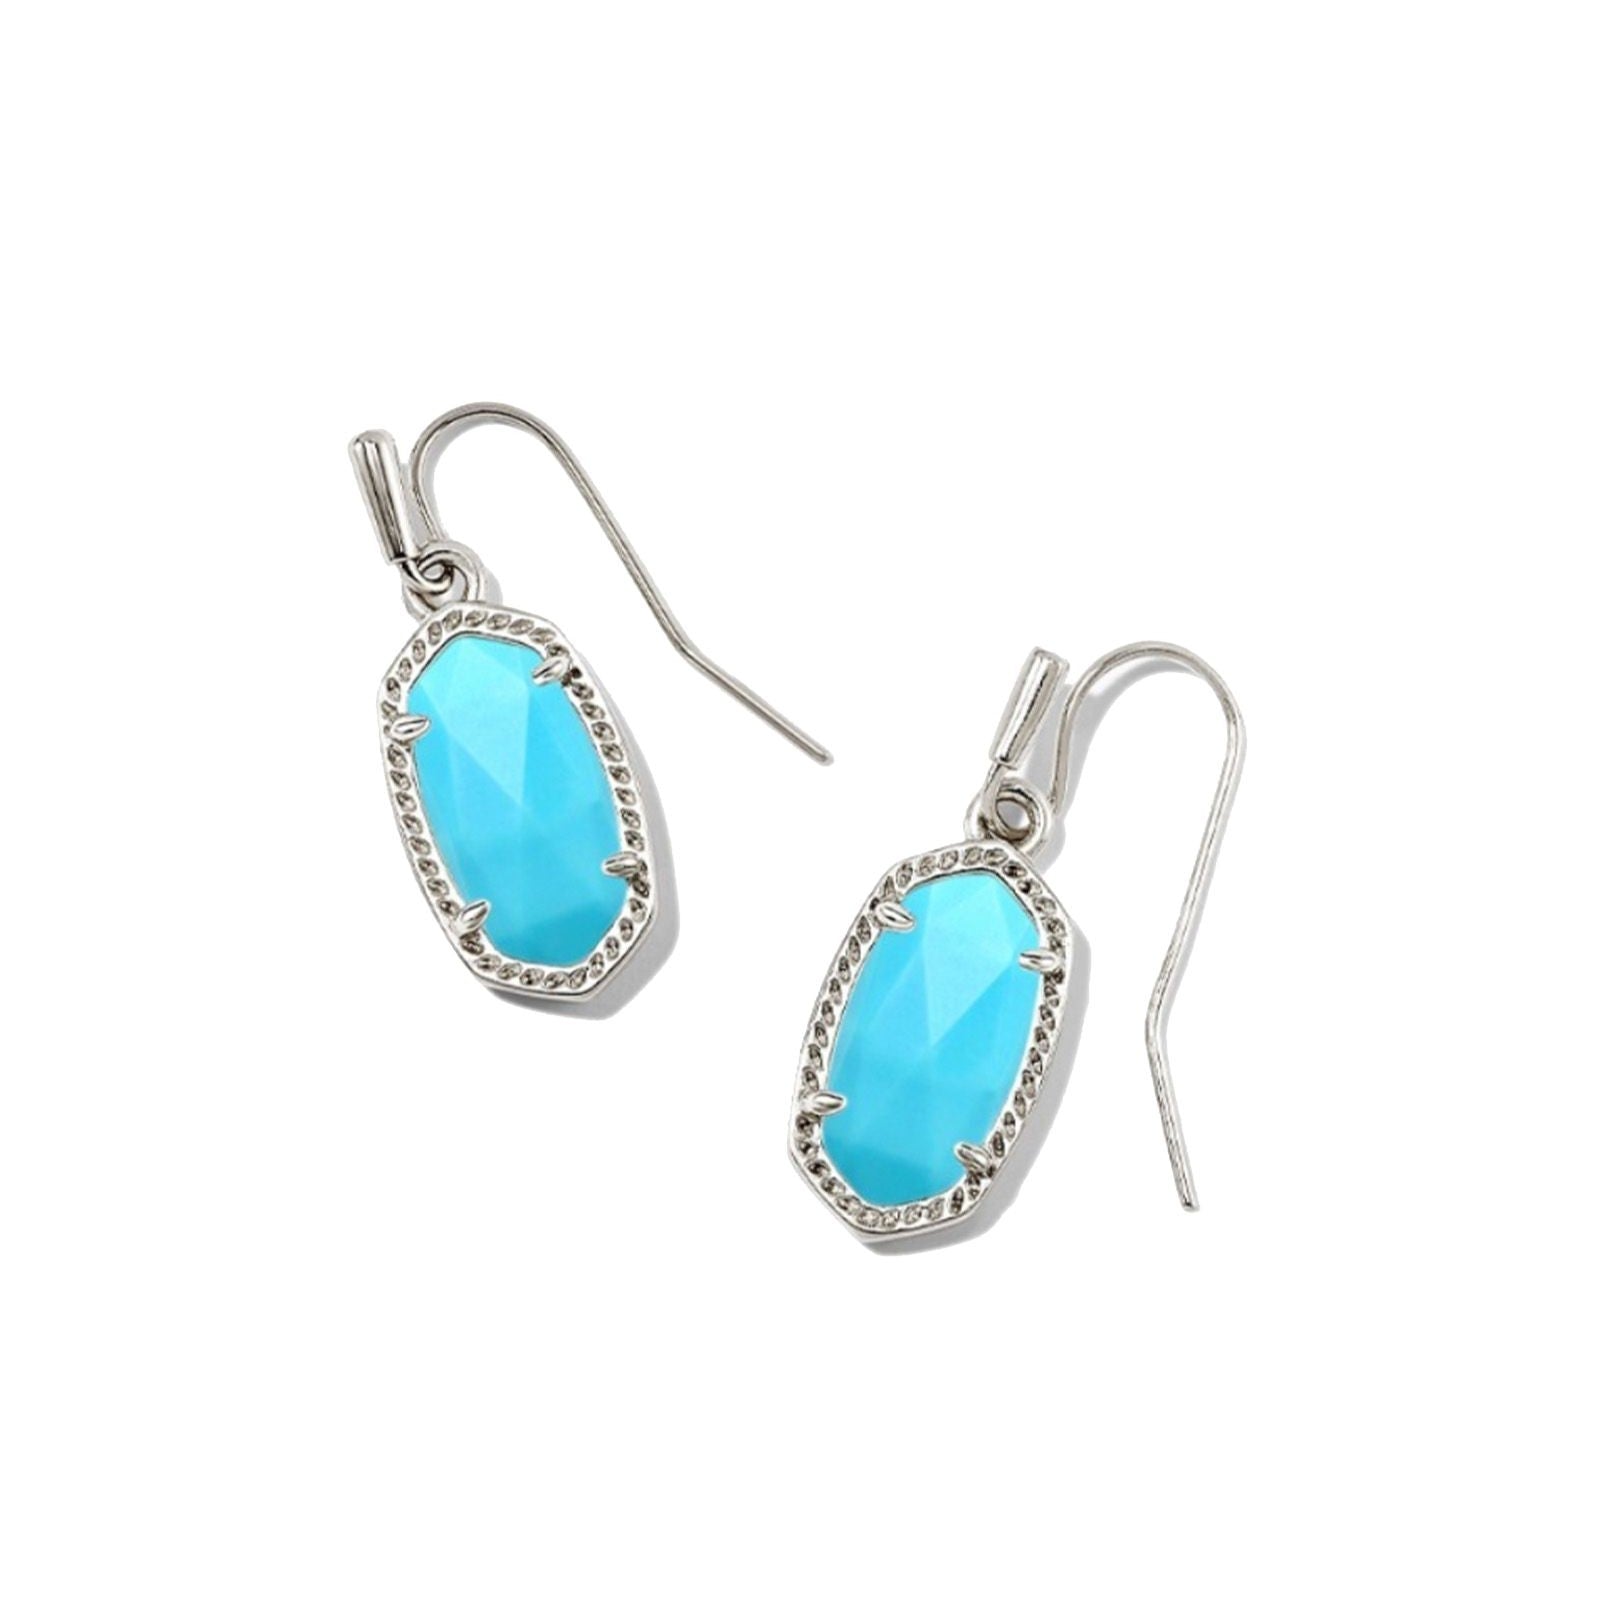 Kendra Scott | Lee Silver Earrings in Variegated Turquoise Magnesite - Giddy Up Glamour Boutique